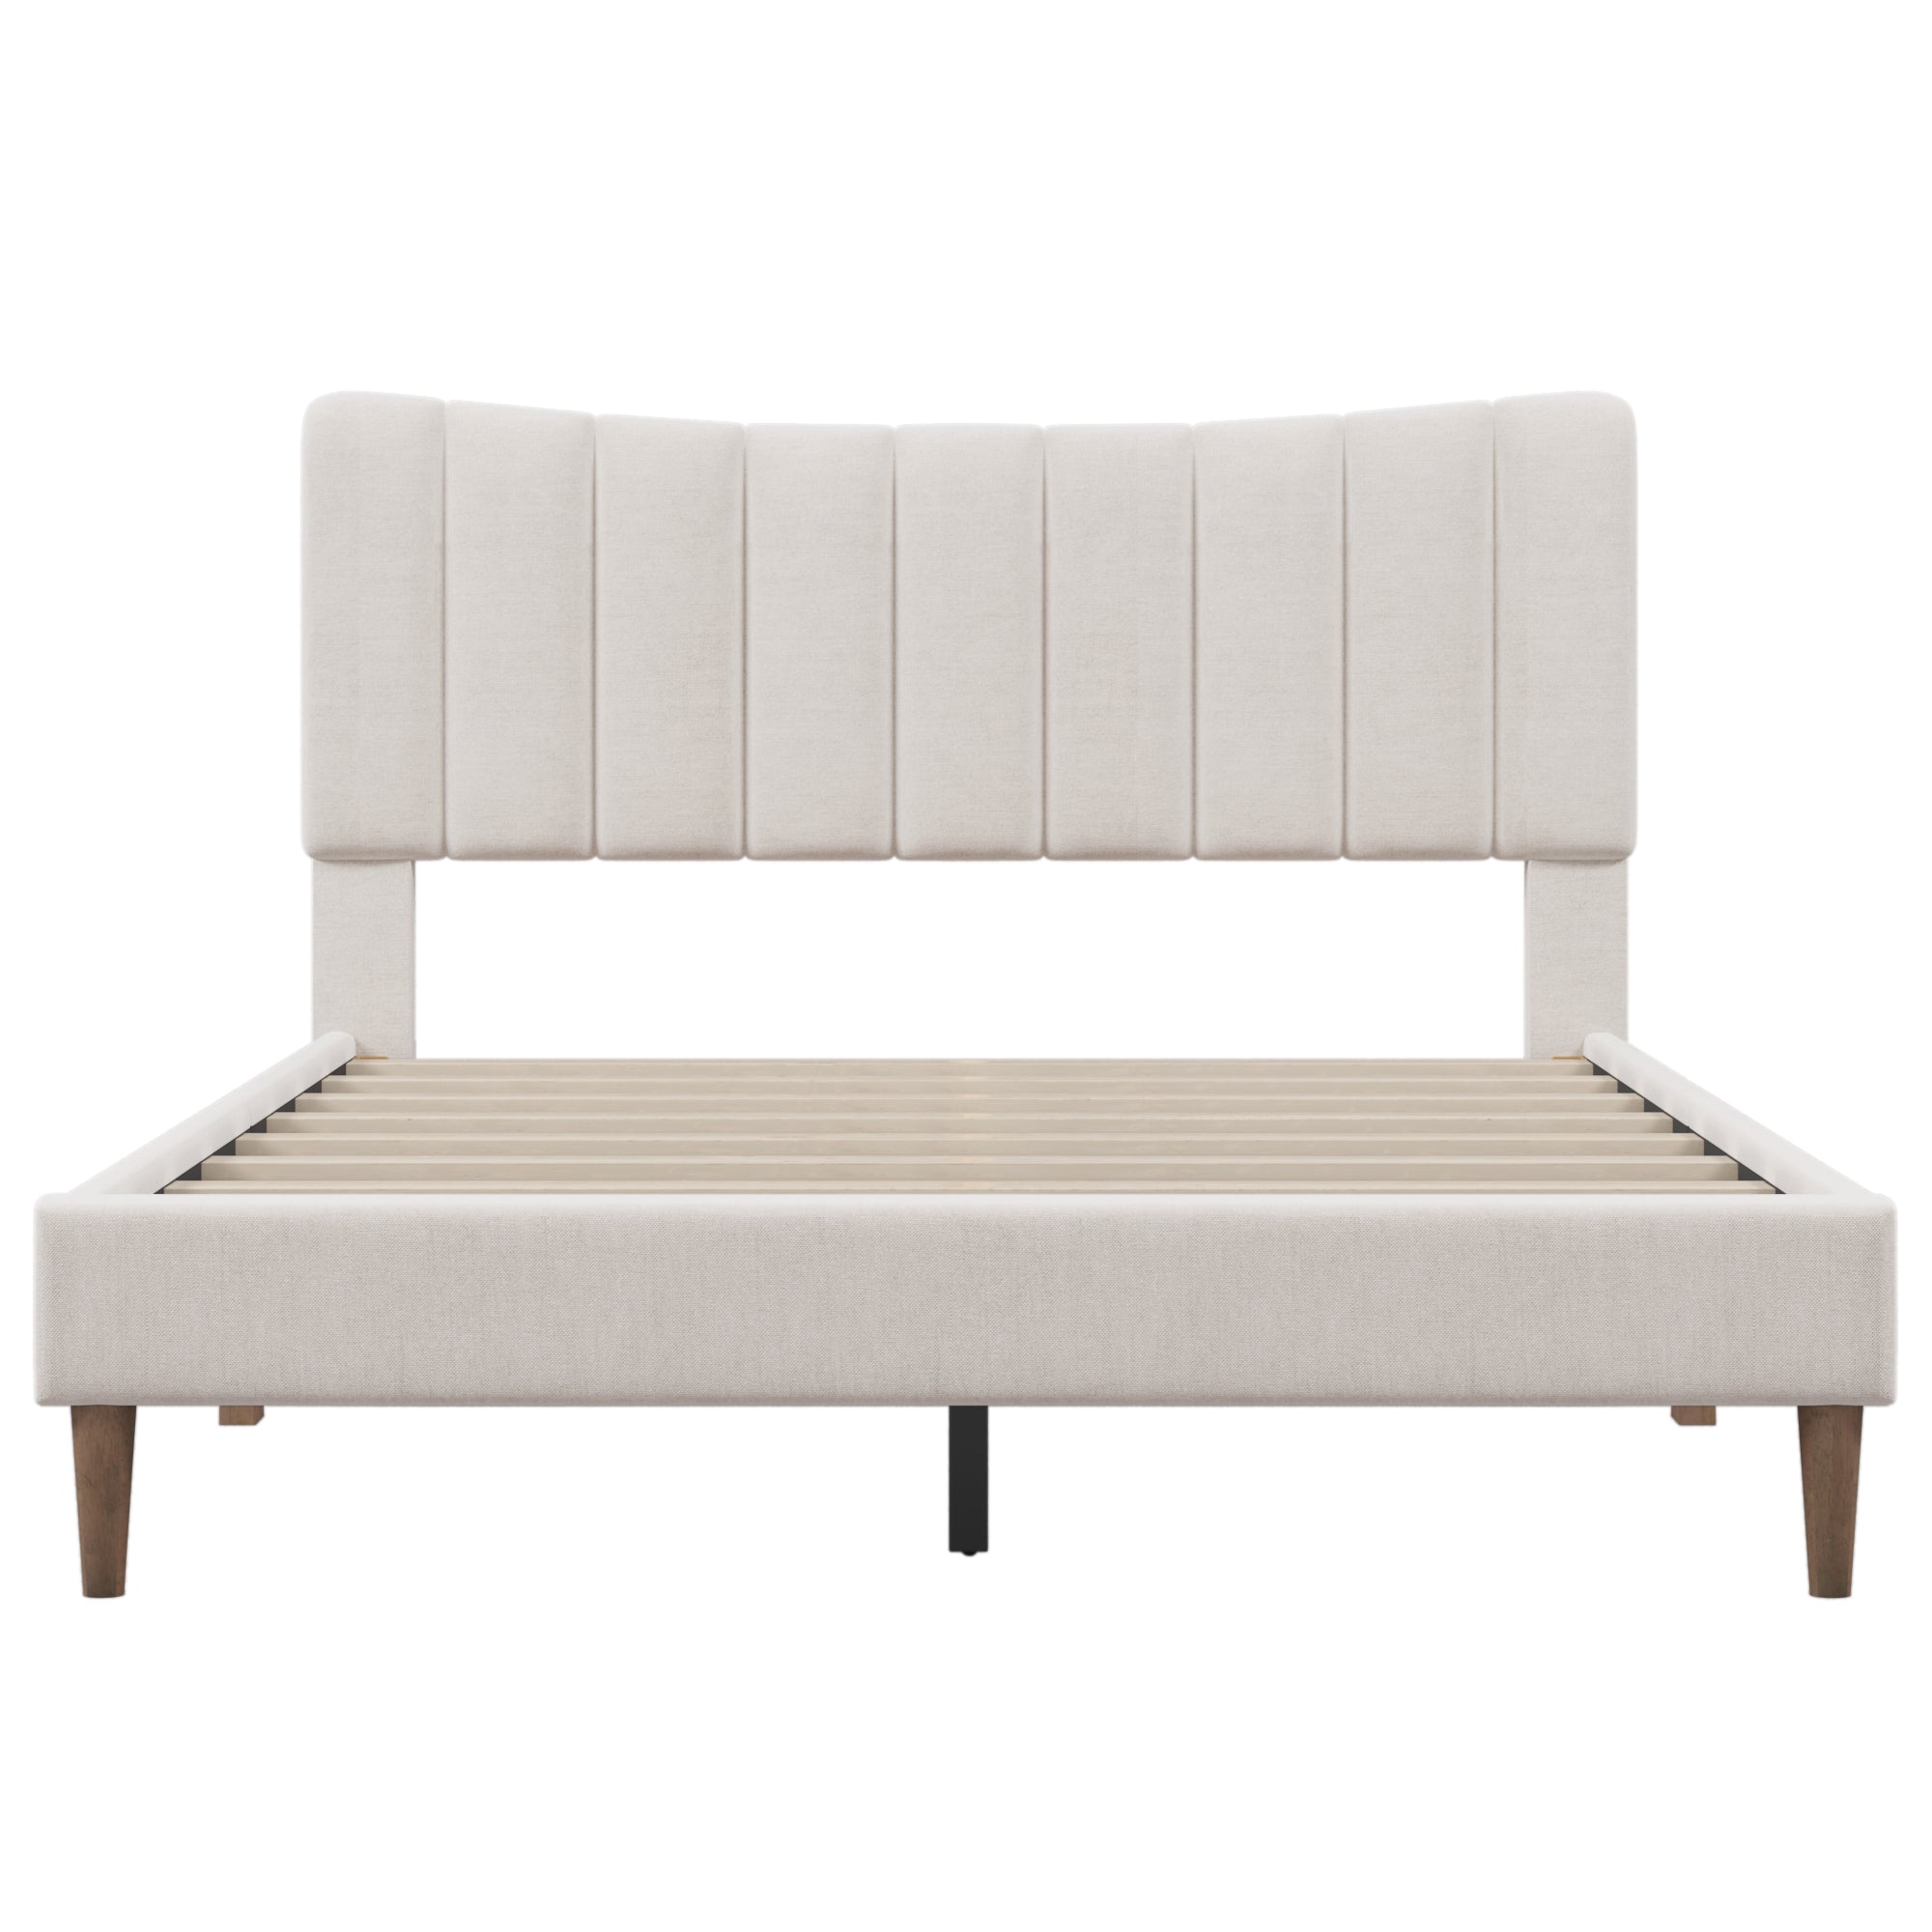 Upholstered Vertical Tufted bed Frame with Tufted Headboard By: Alabama Beds